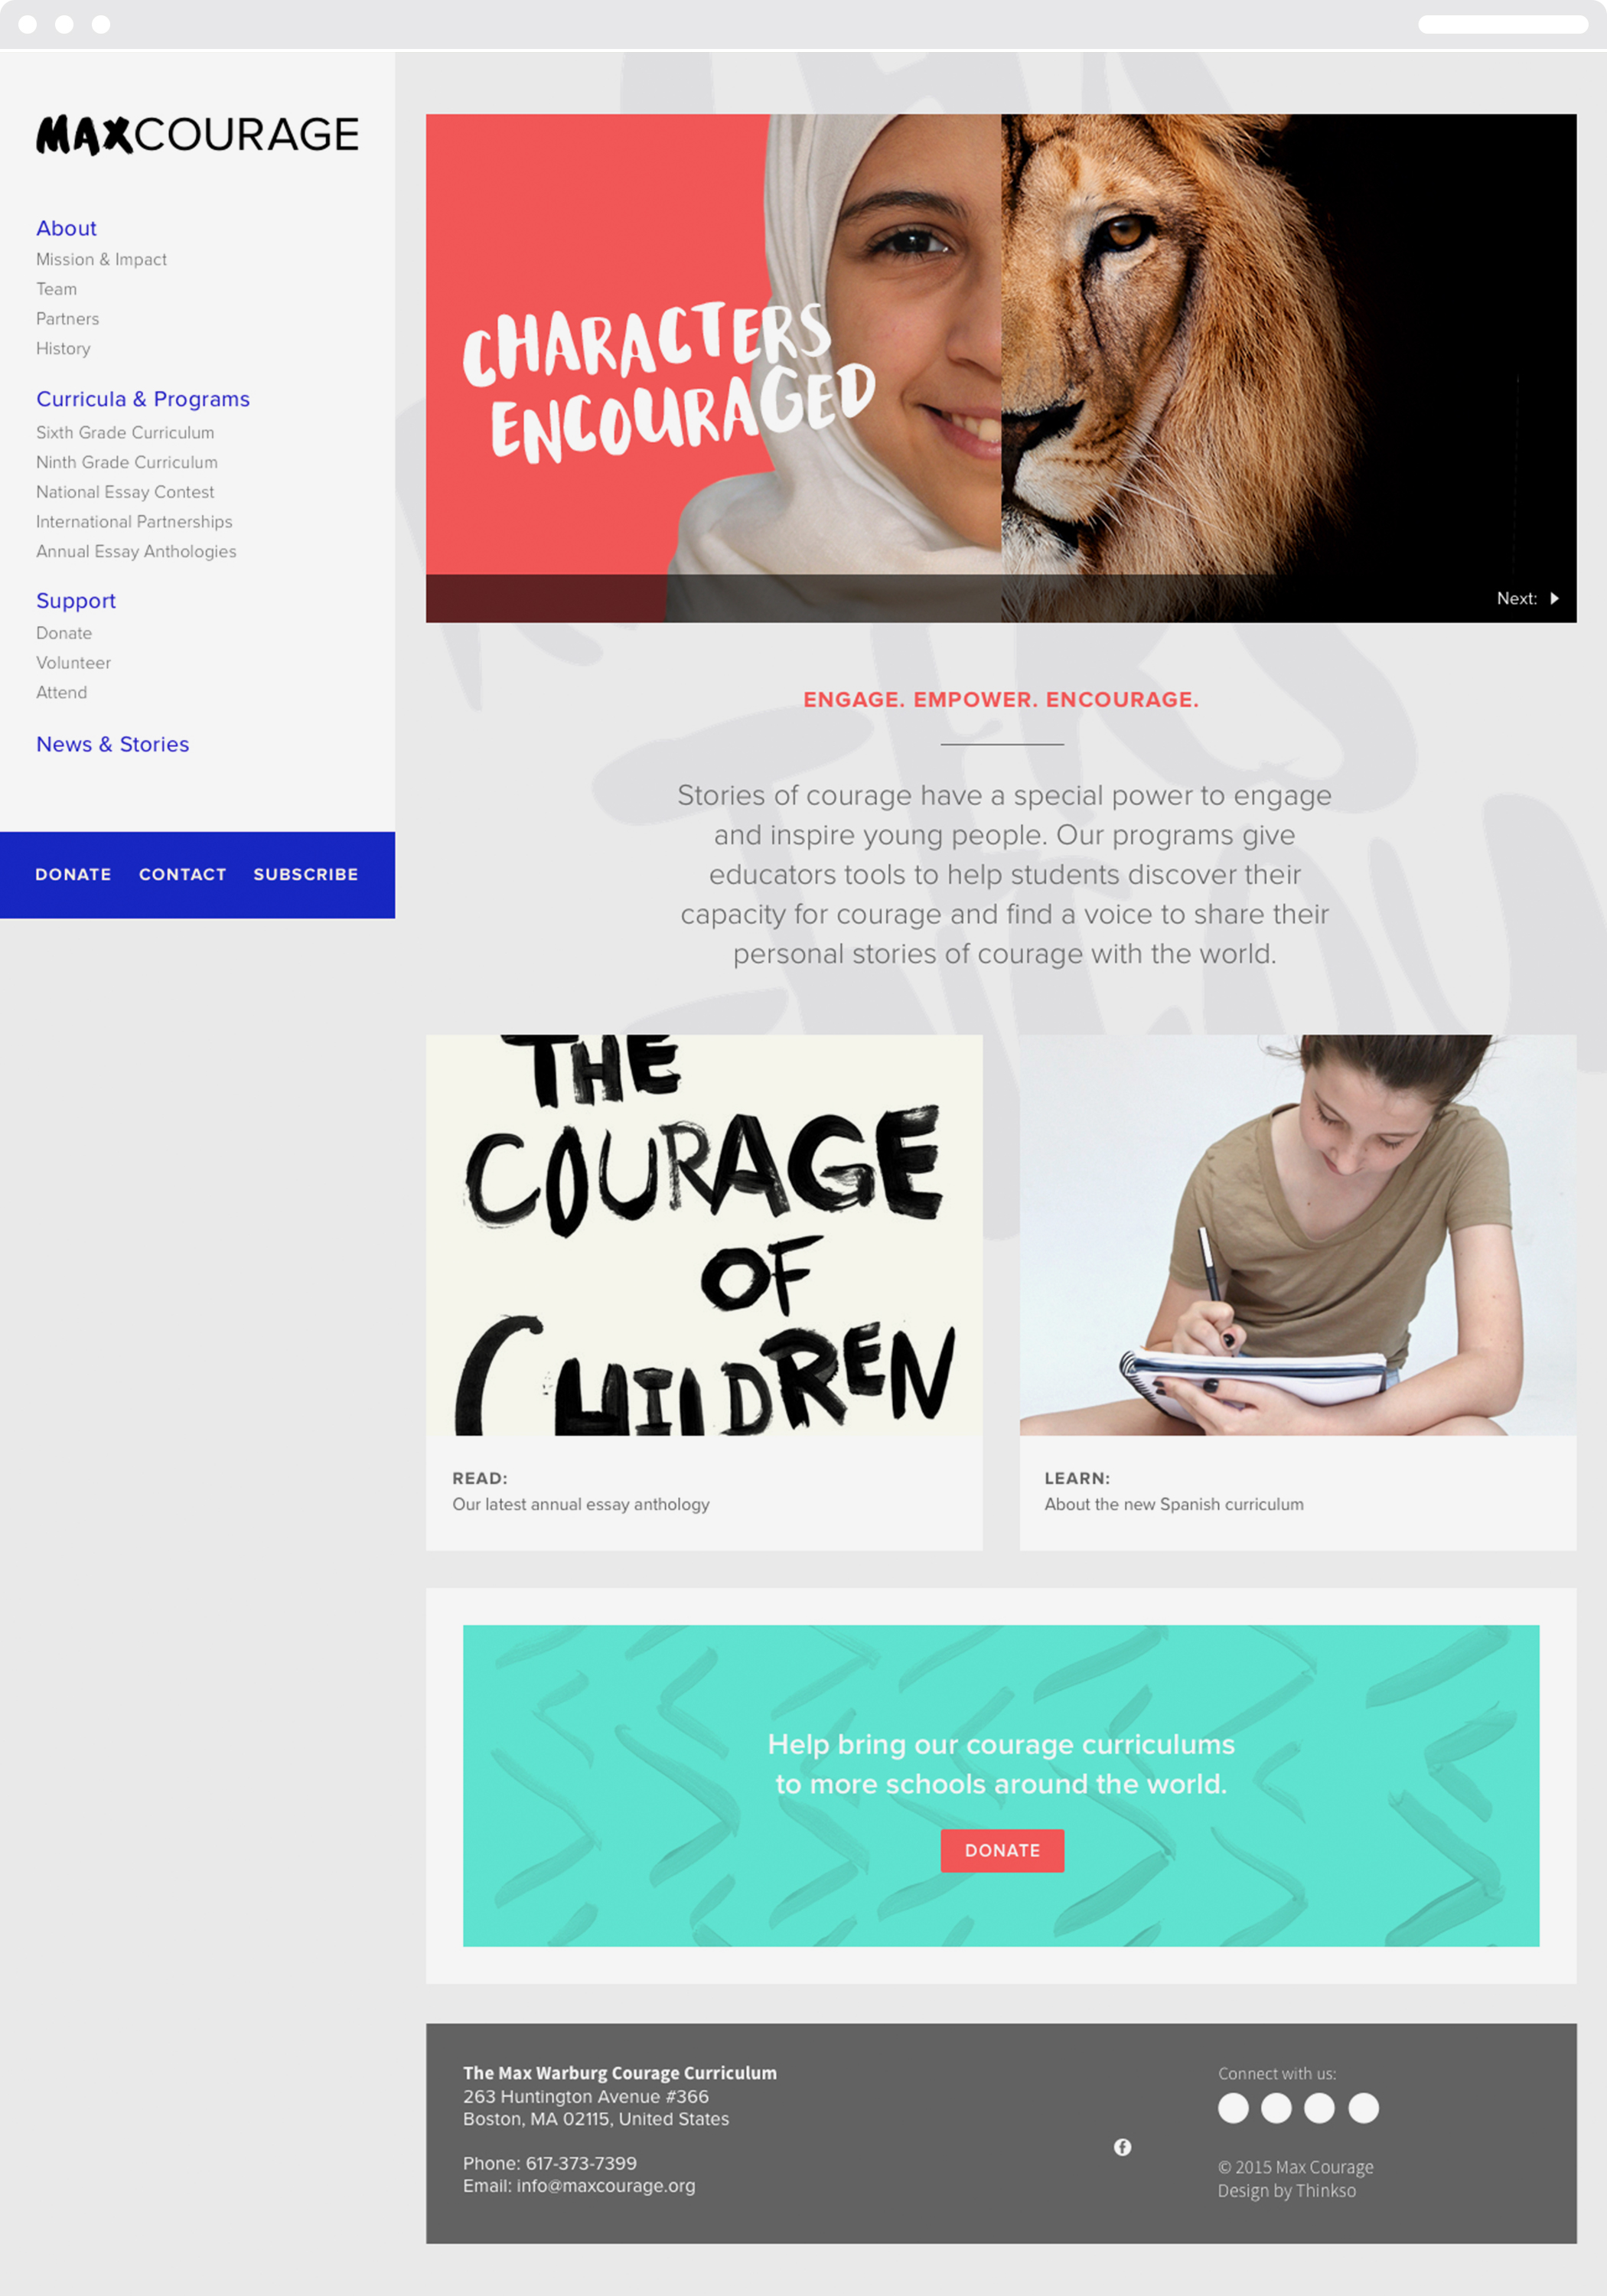 The Max Courage homepage with the headline "Characters encouraged" and a split image of a girl and a lion that creates one hybrid face.